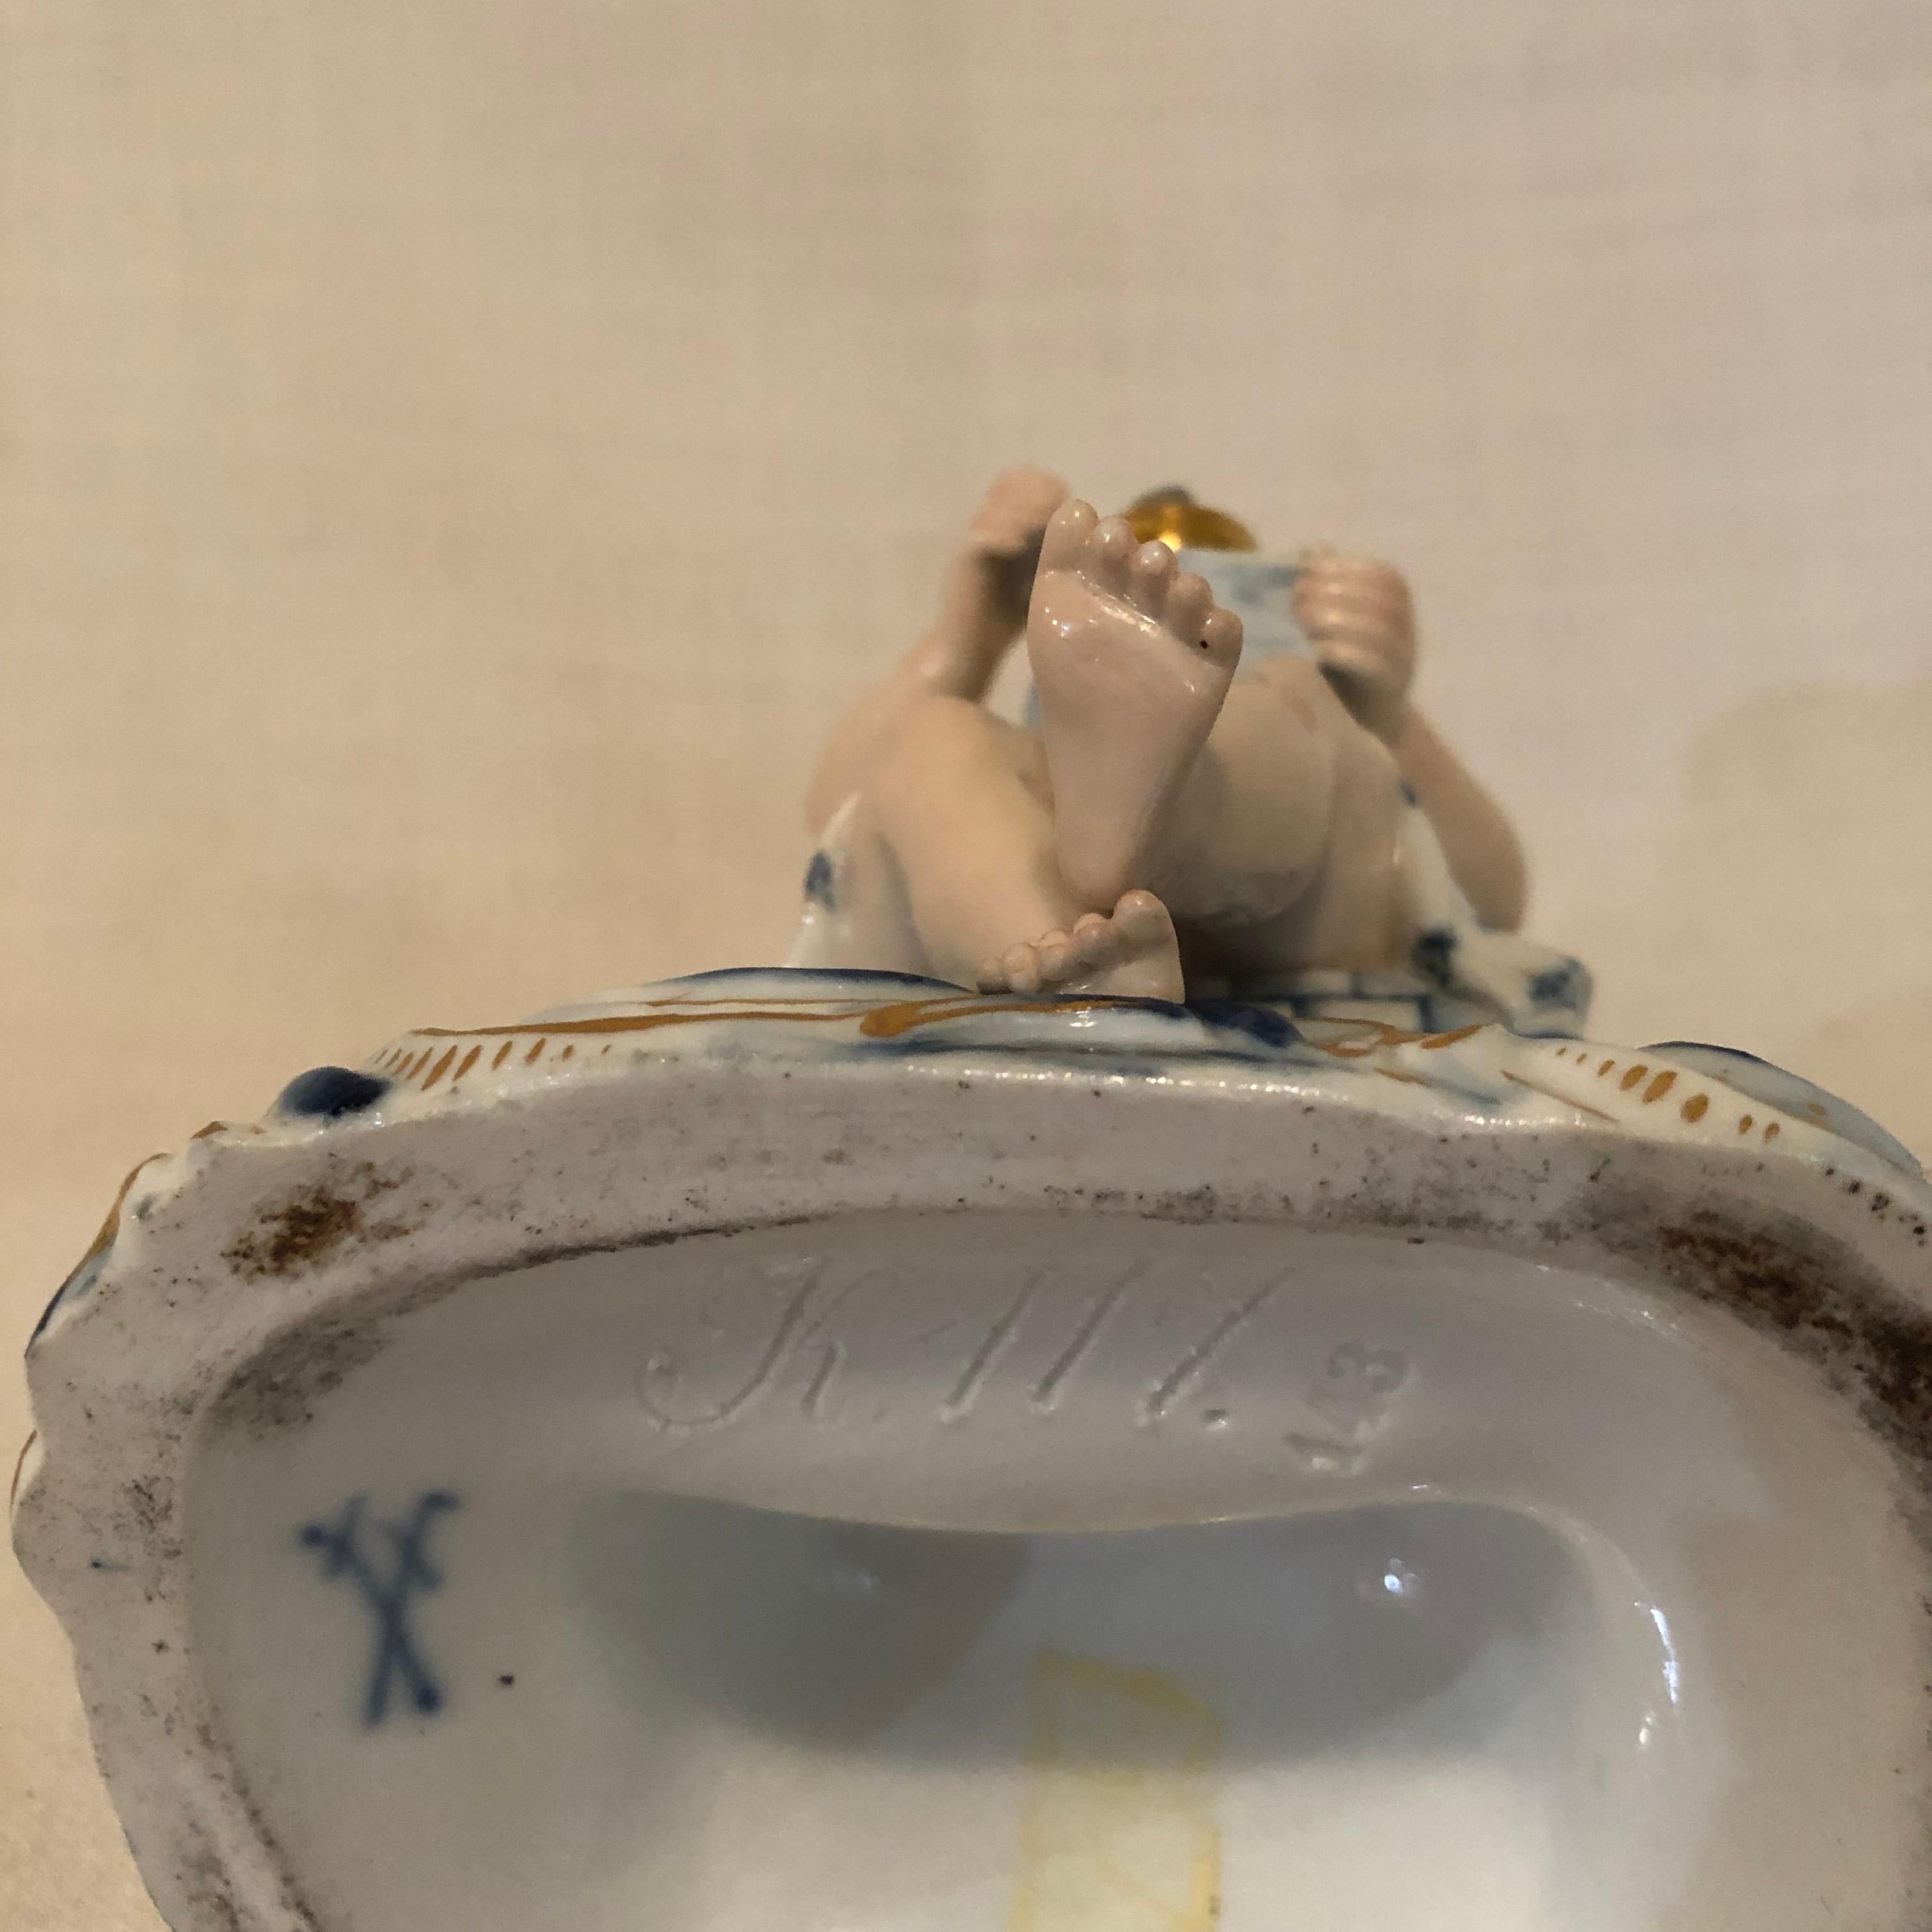 Late 19th Century Meissen Figurine of a Boy Angel with Wings Grounding Coffee for His Coffee Pot